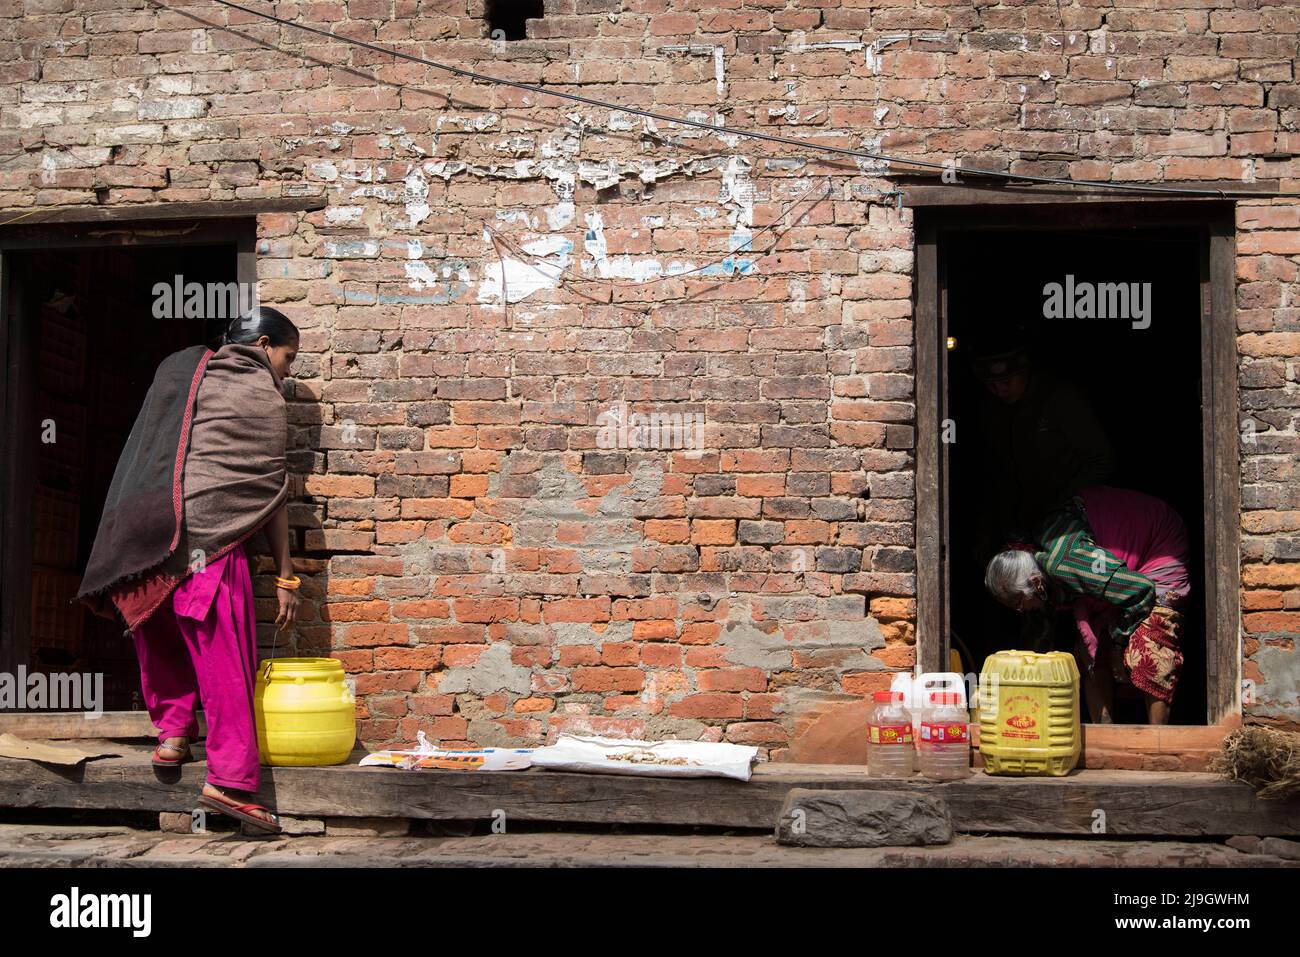 Kathmandu, Nepal- April 20,2022 : Women wash clothes and dishes on the streets of Patan Durbar Square. Stock Photo